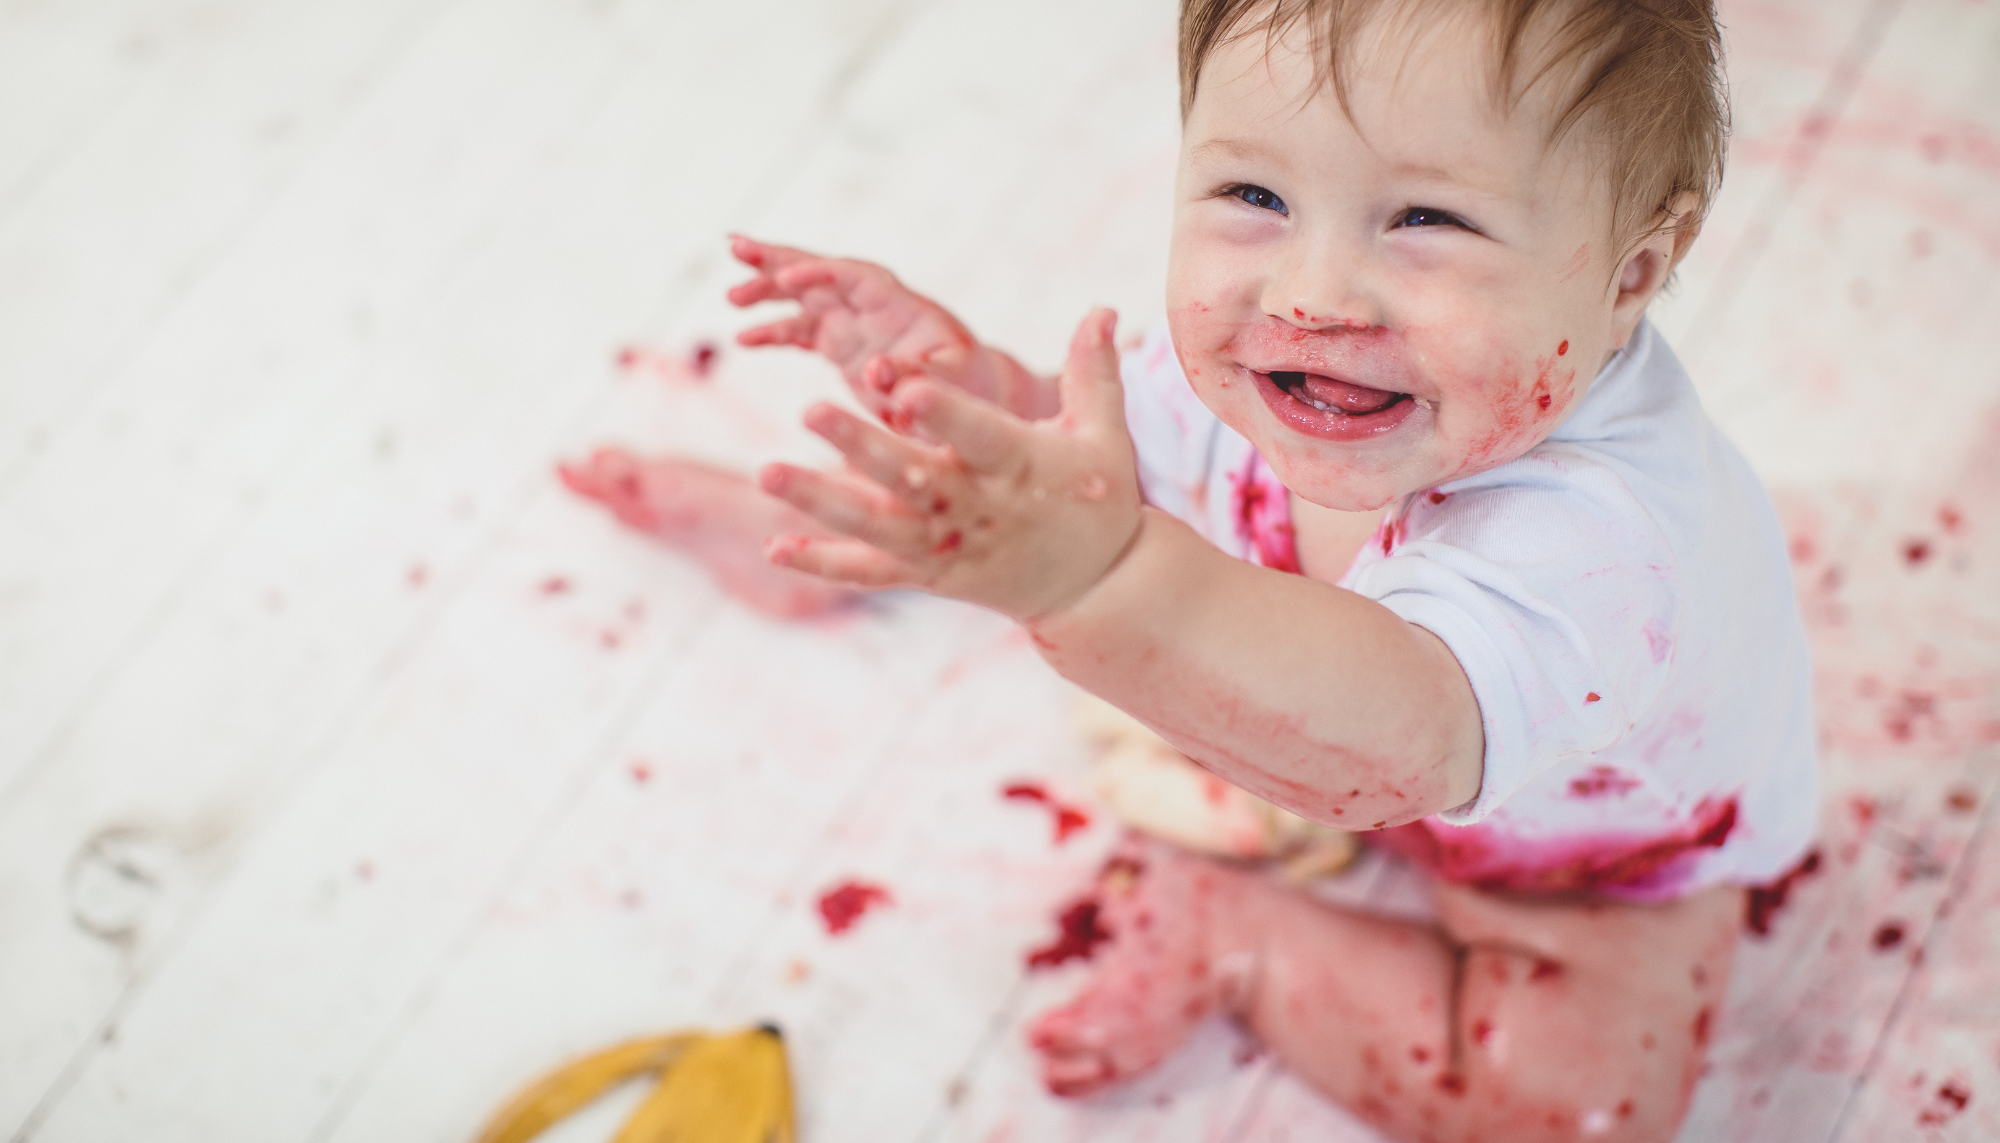 White baby with food stains on clothes reaching out 